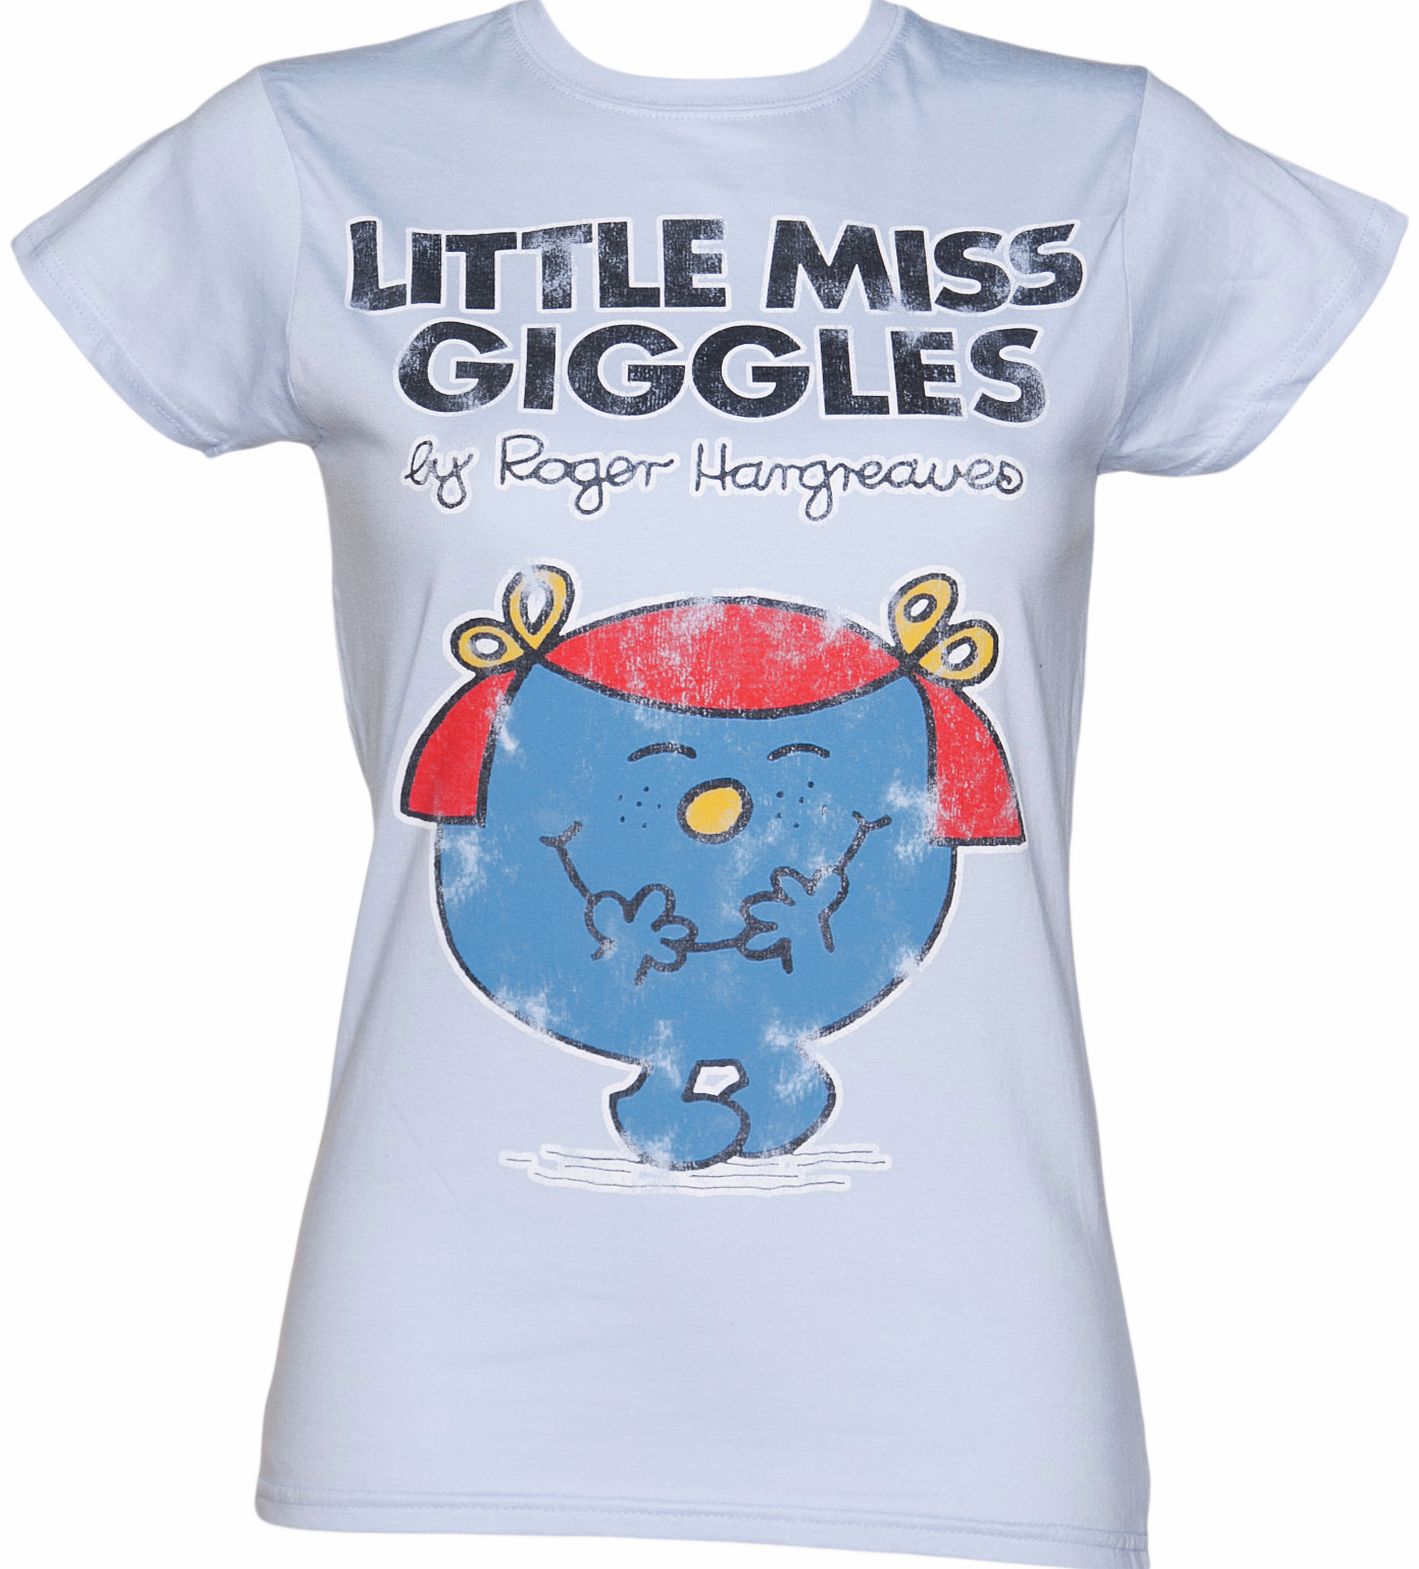 Ladies Little Miss Giggles T-Shirt